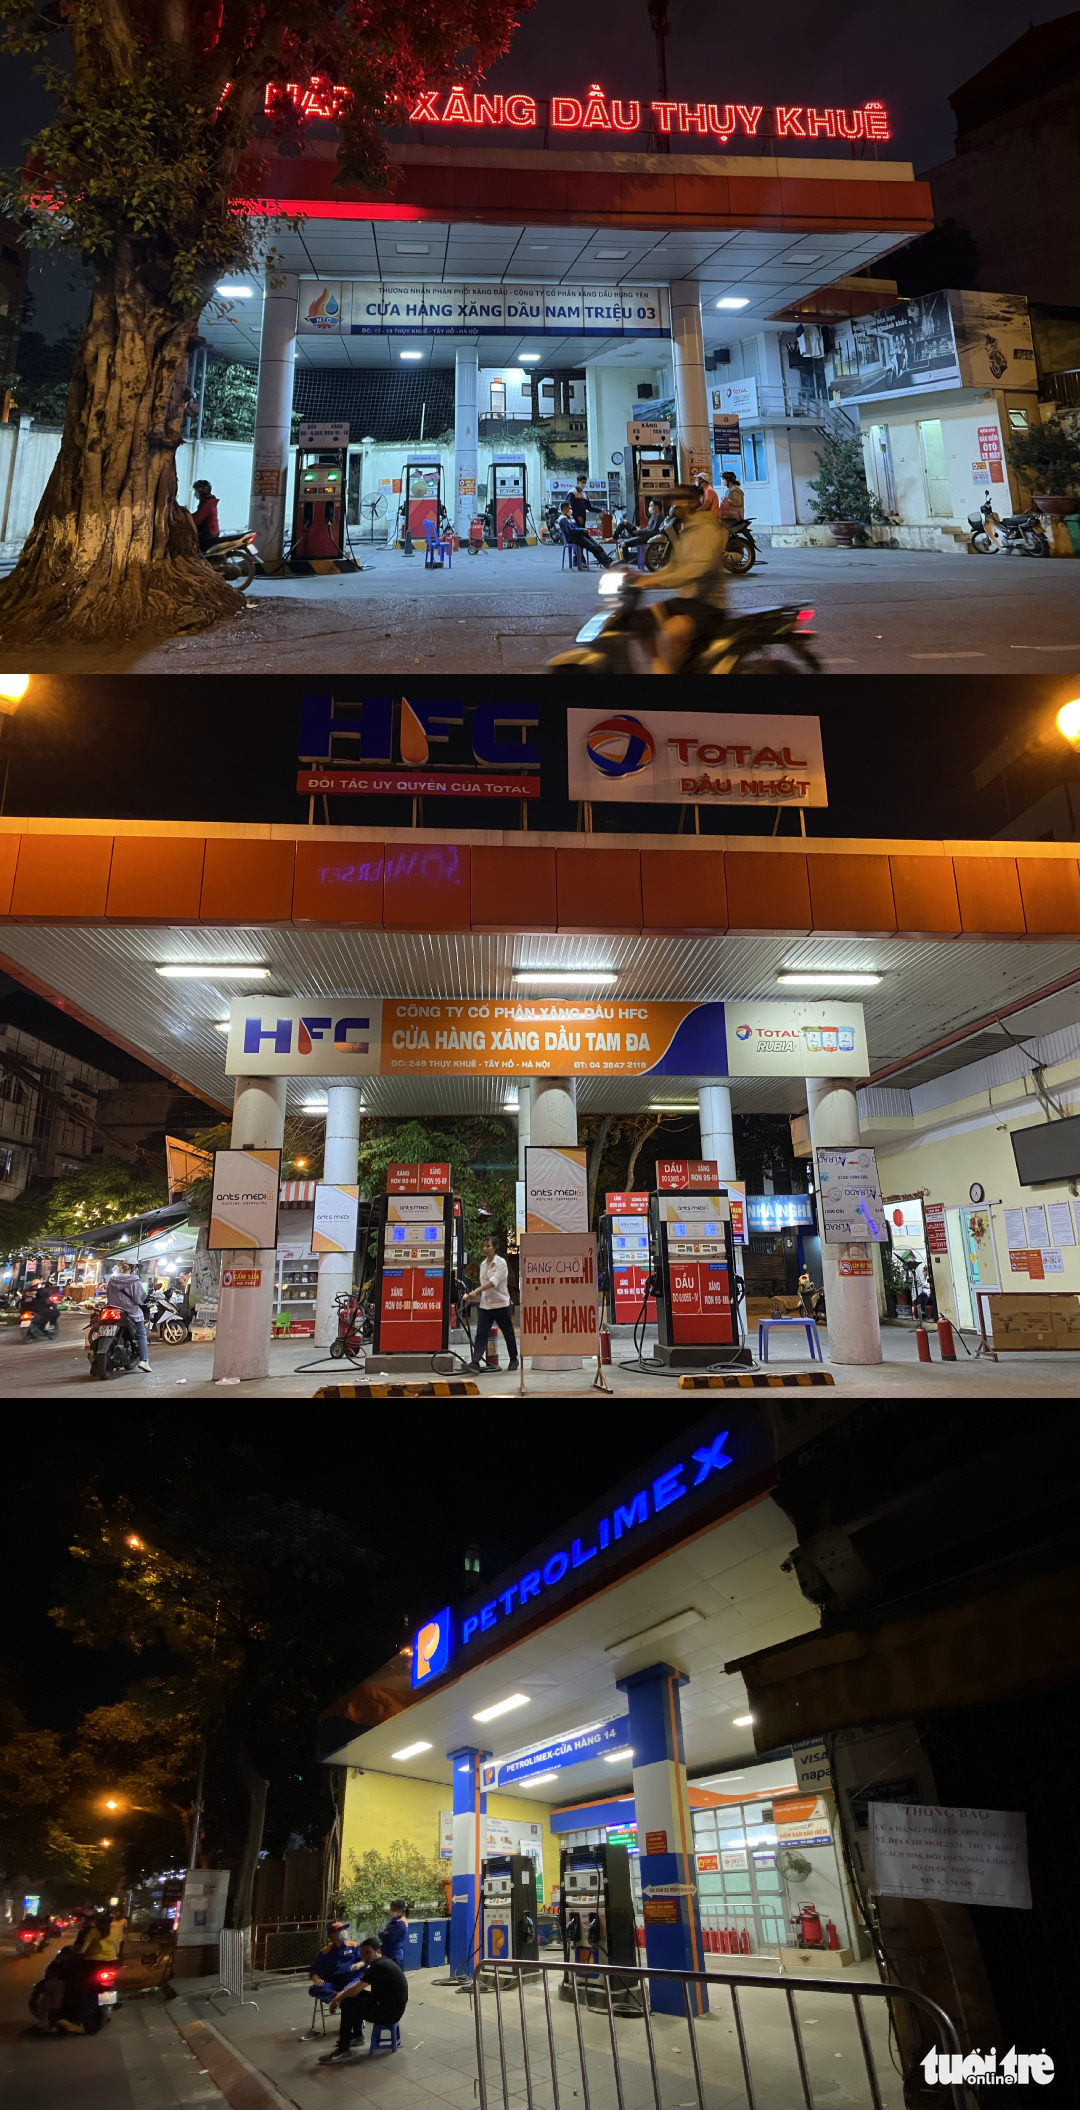 Thuy Khue, Tam Da, and Petrolimex 14 filling stations are closed in Tay Ho District, Hanoi, November 4, 2022. Photo: Tuoi Tre